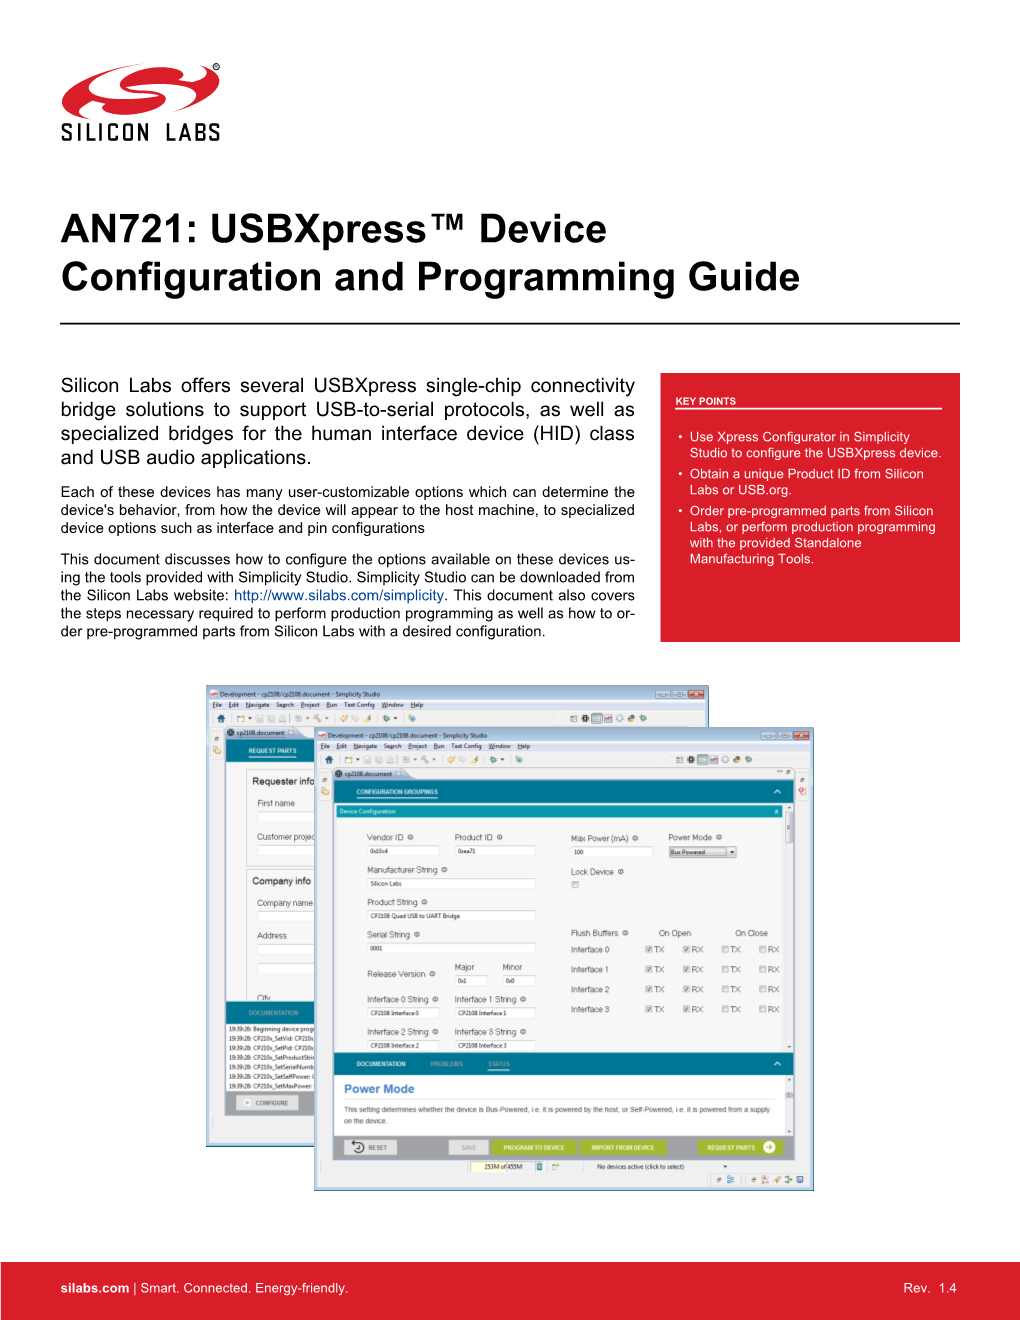 AN721: Usbxpress™ Device Configuration and Programming Guide